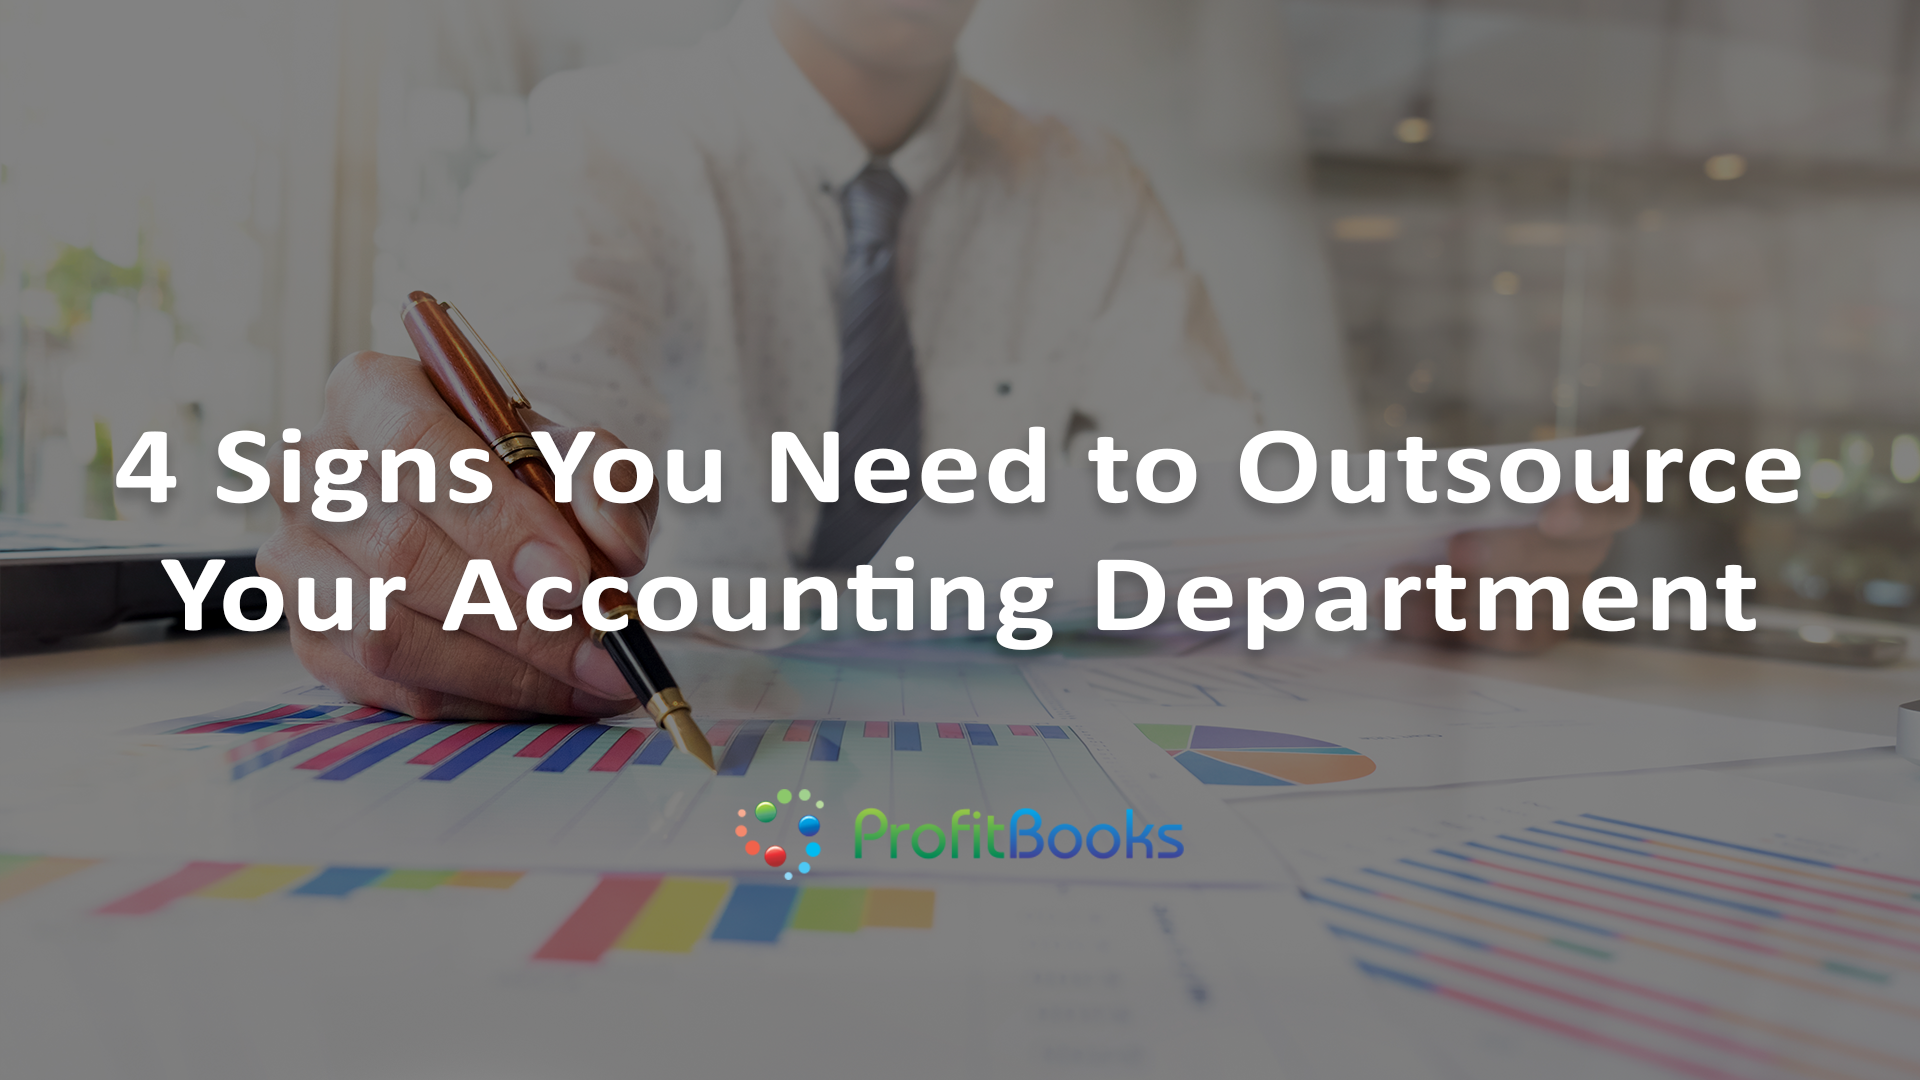 4 Signs You Need to Outsource Your Accounting Department